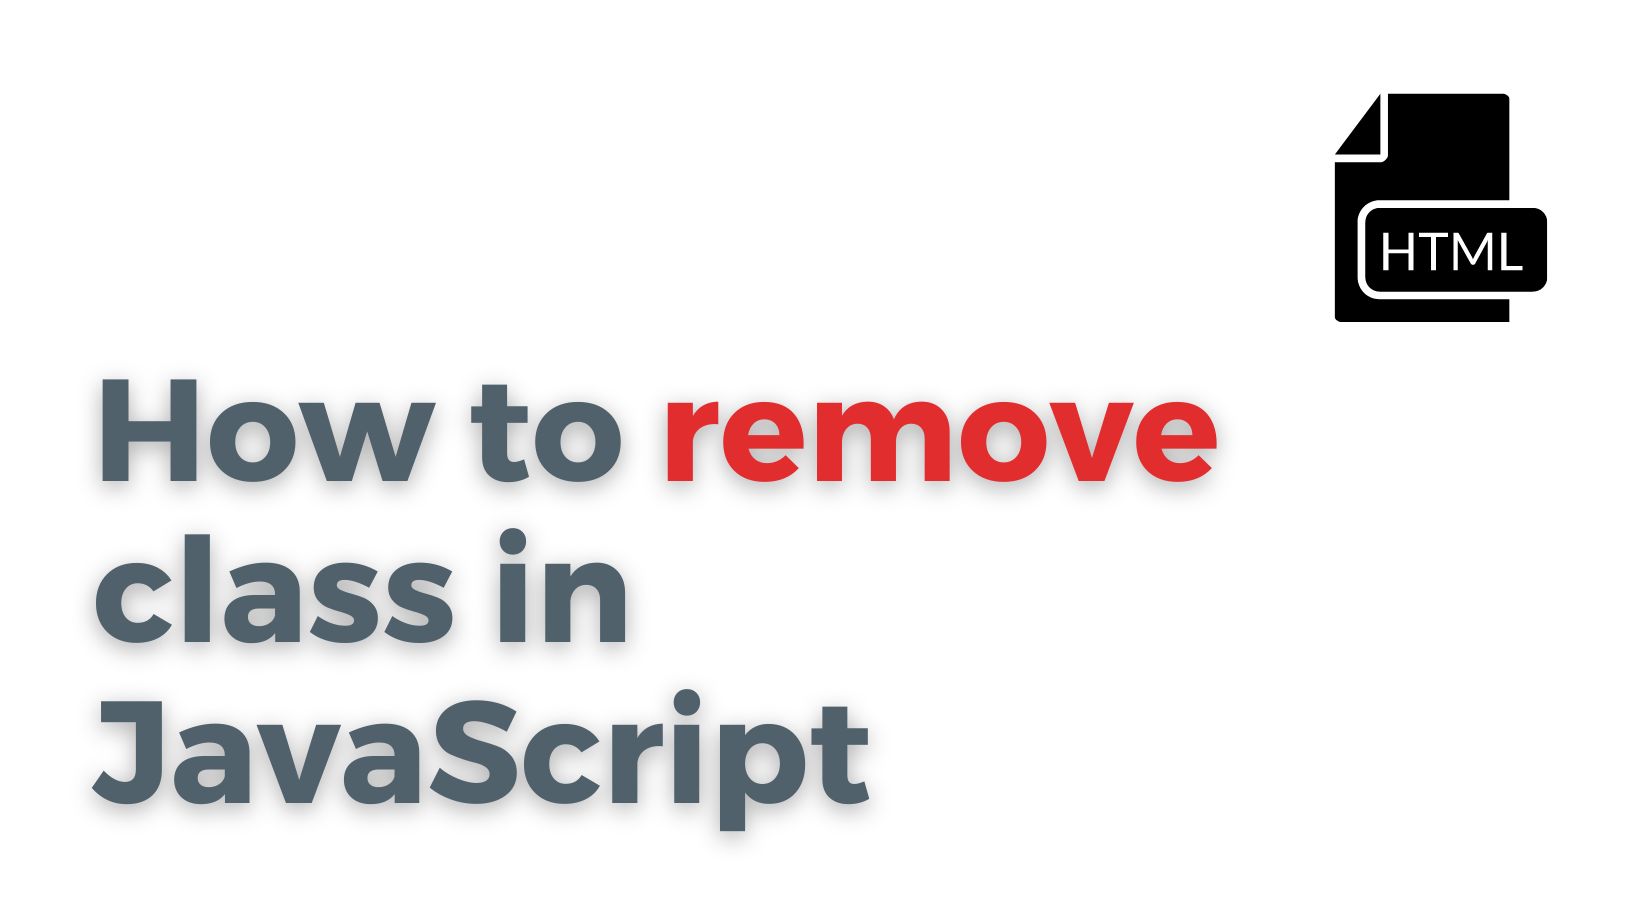 How to remove class in JavaScript